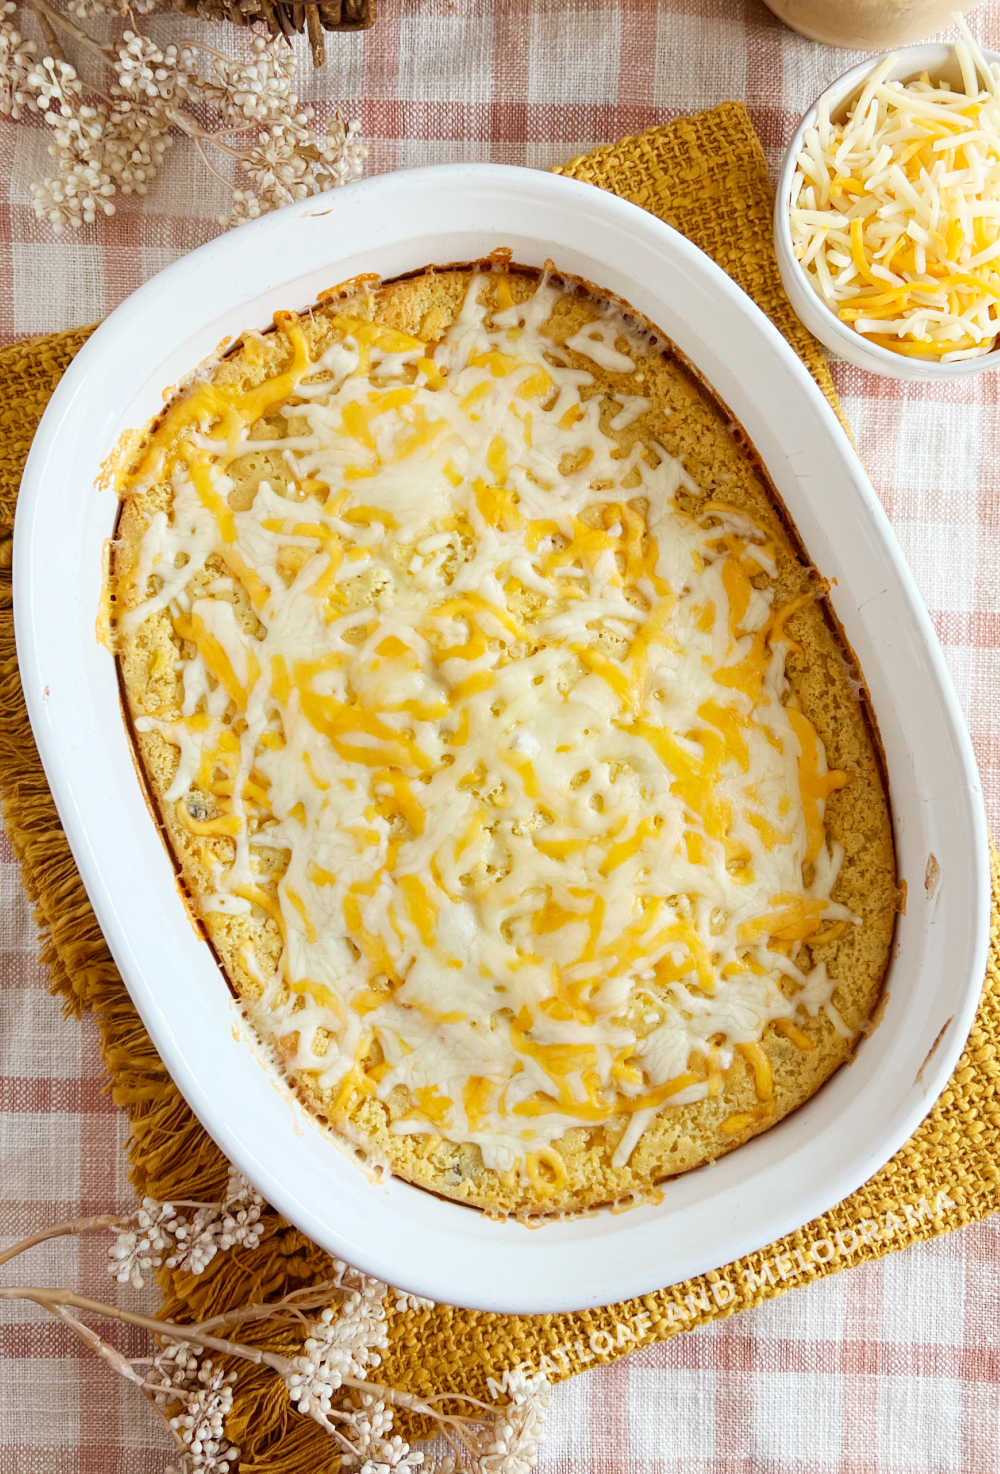 baked jiffy corn casserole topped with shredded cheese on holiday table